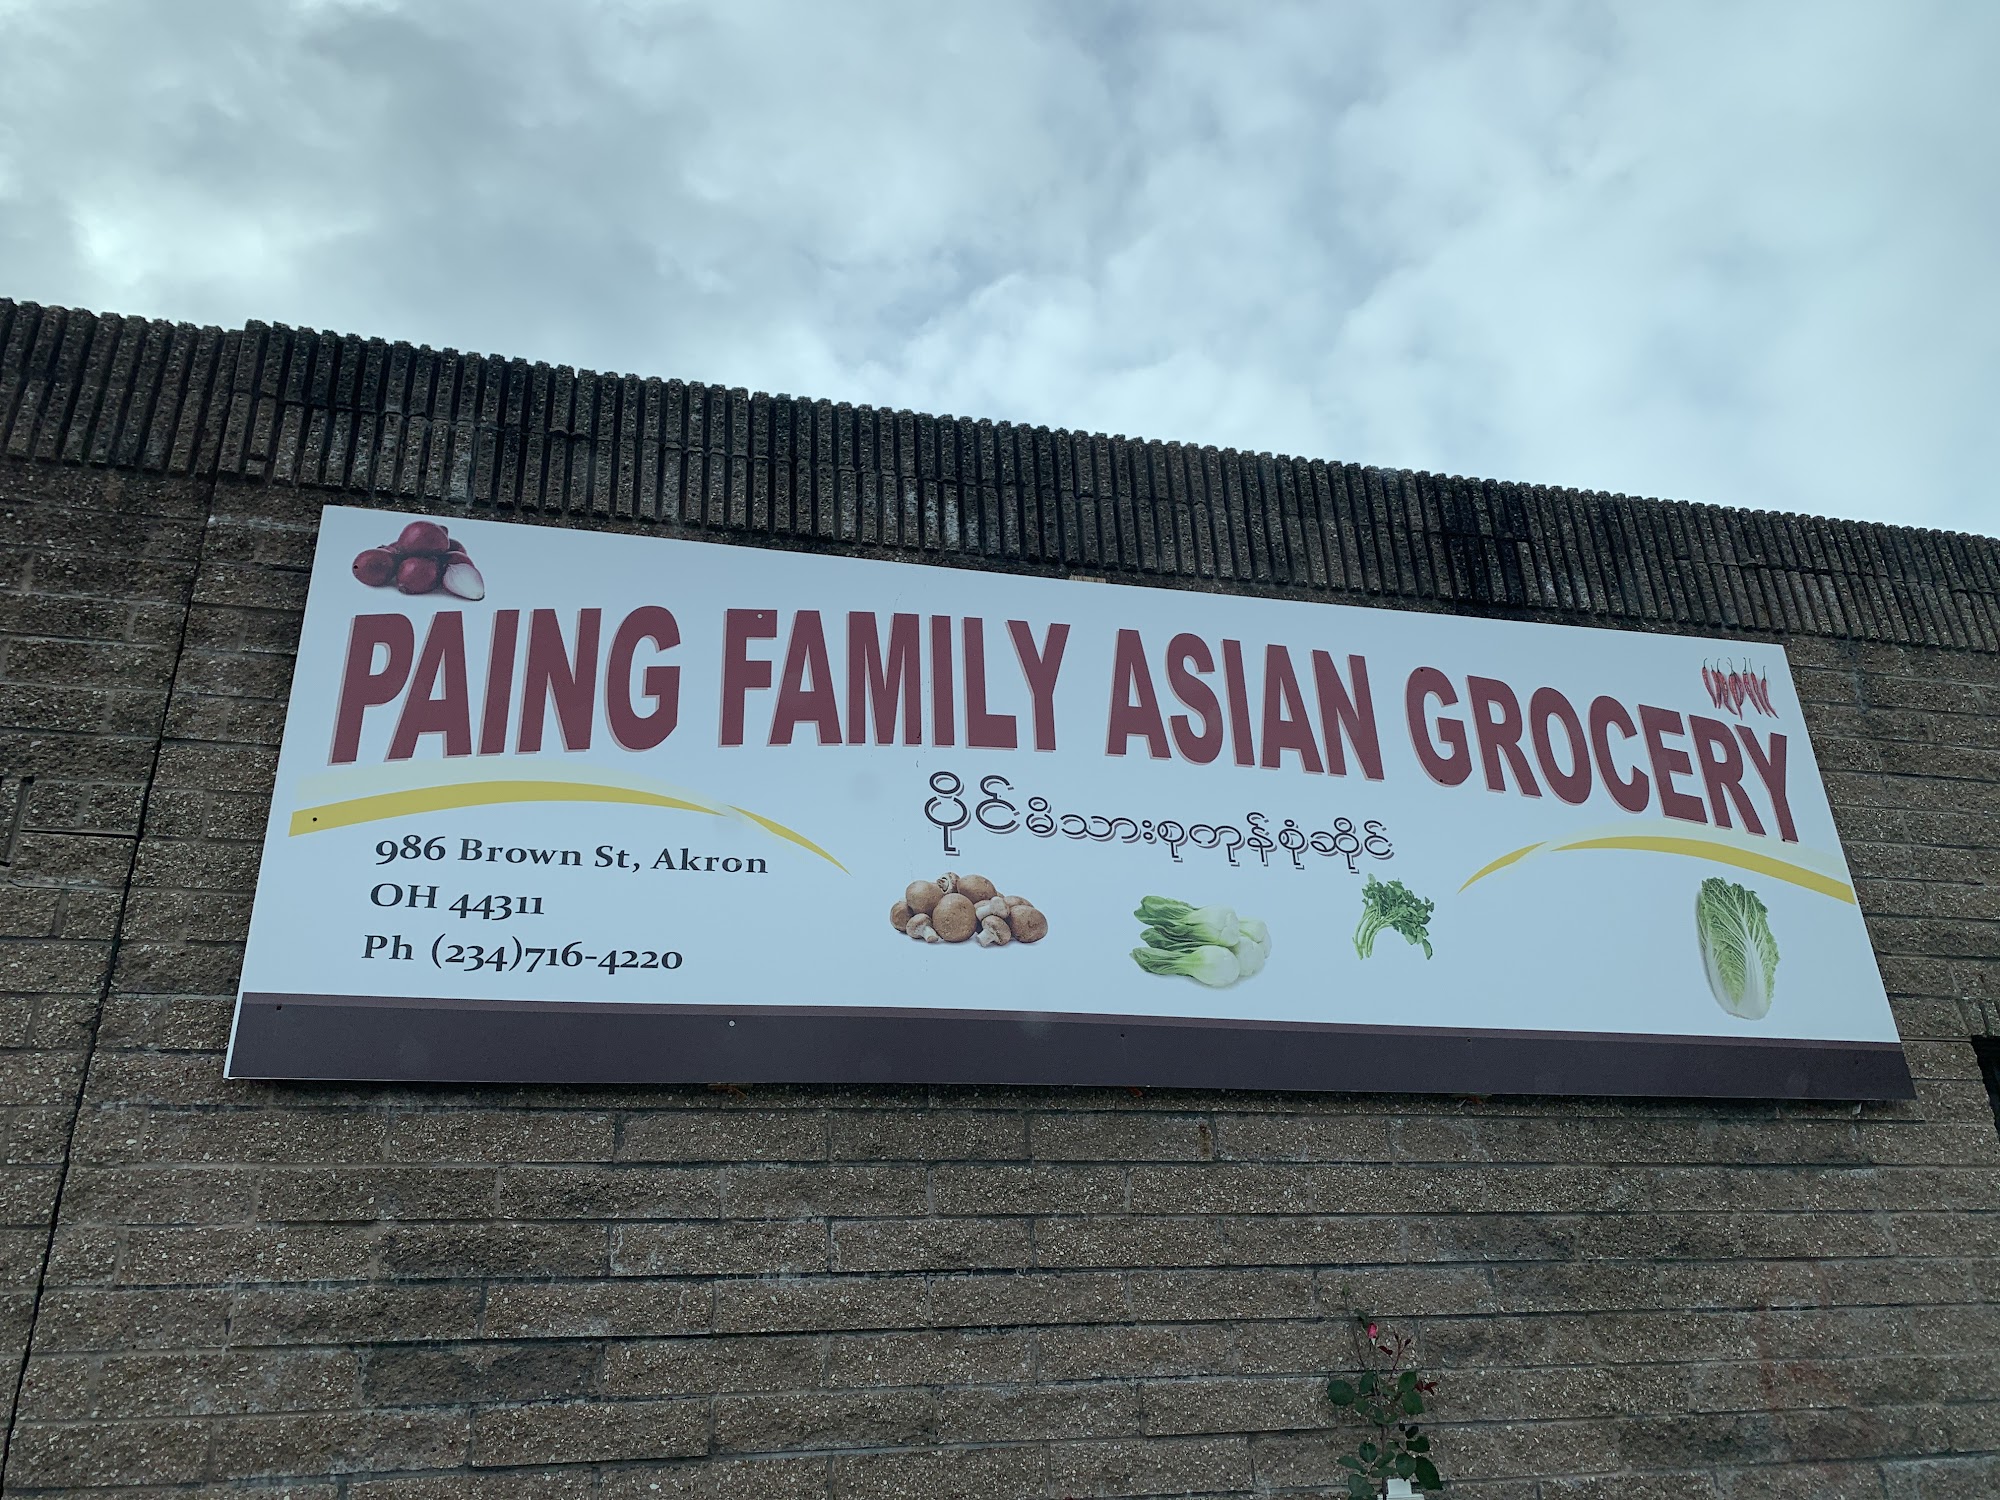 PAING FAMILY ASIAN GROCERY